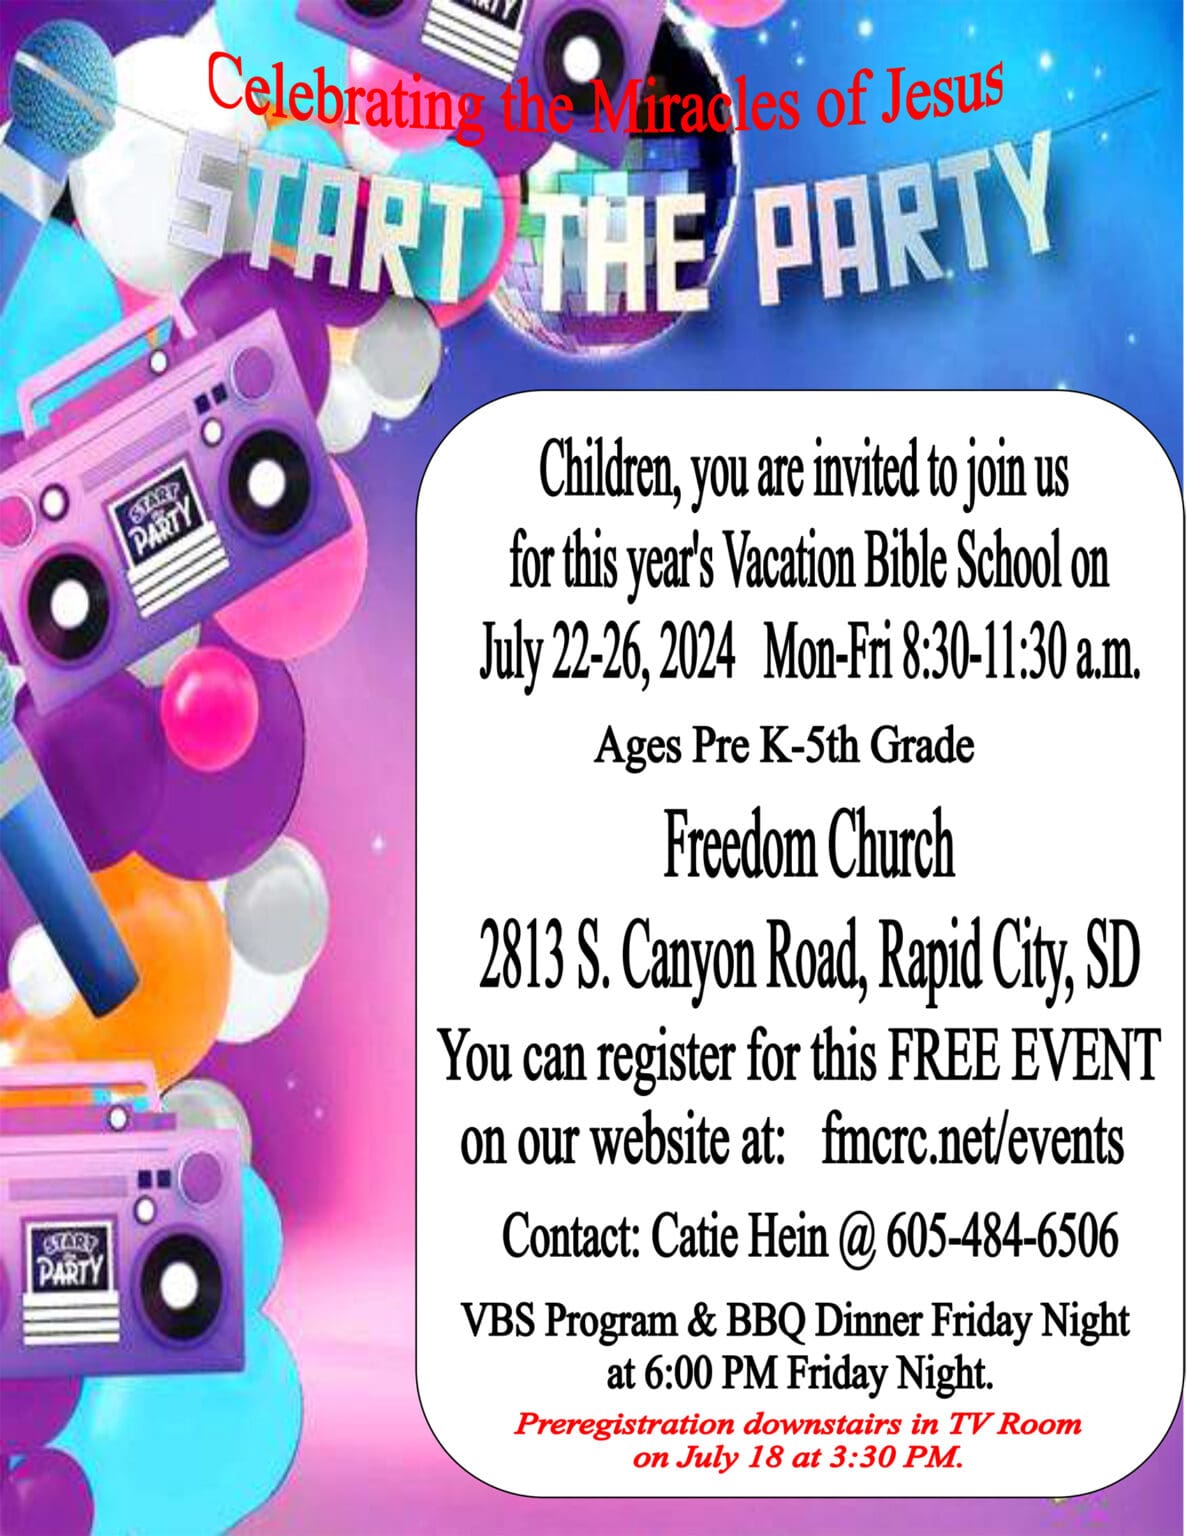 Start the party Vacation Bible School July 22-26 M-F 8:30-11:30am at Freedom Church 4813 So. Canyon Rd. Rapid City, SD